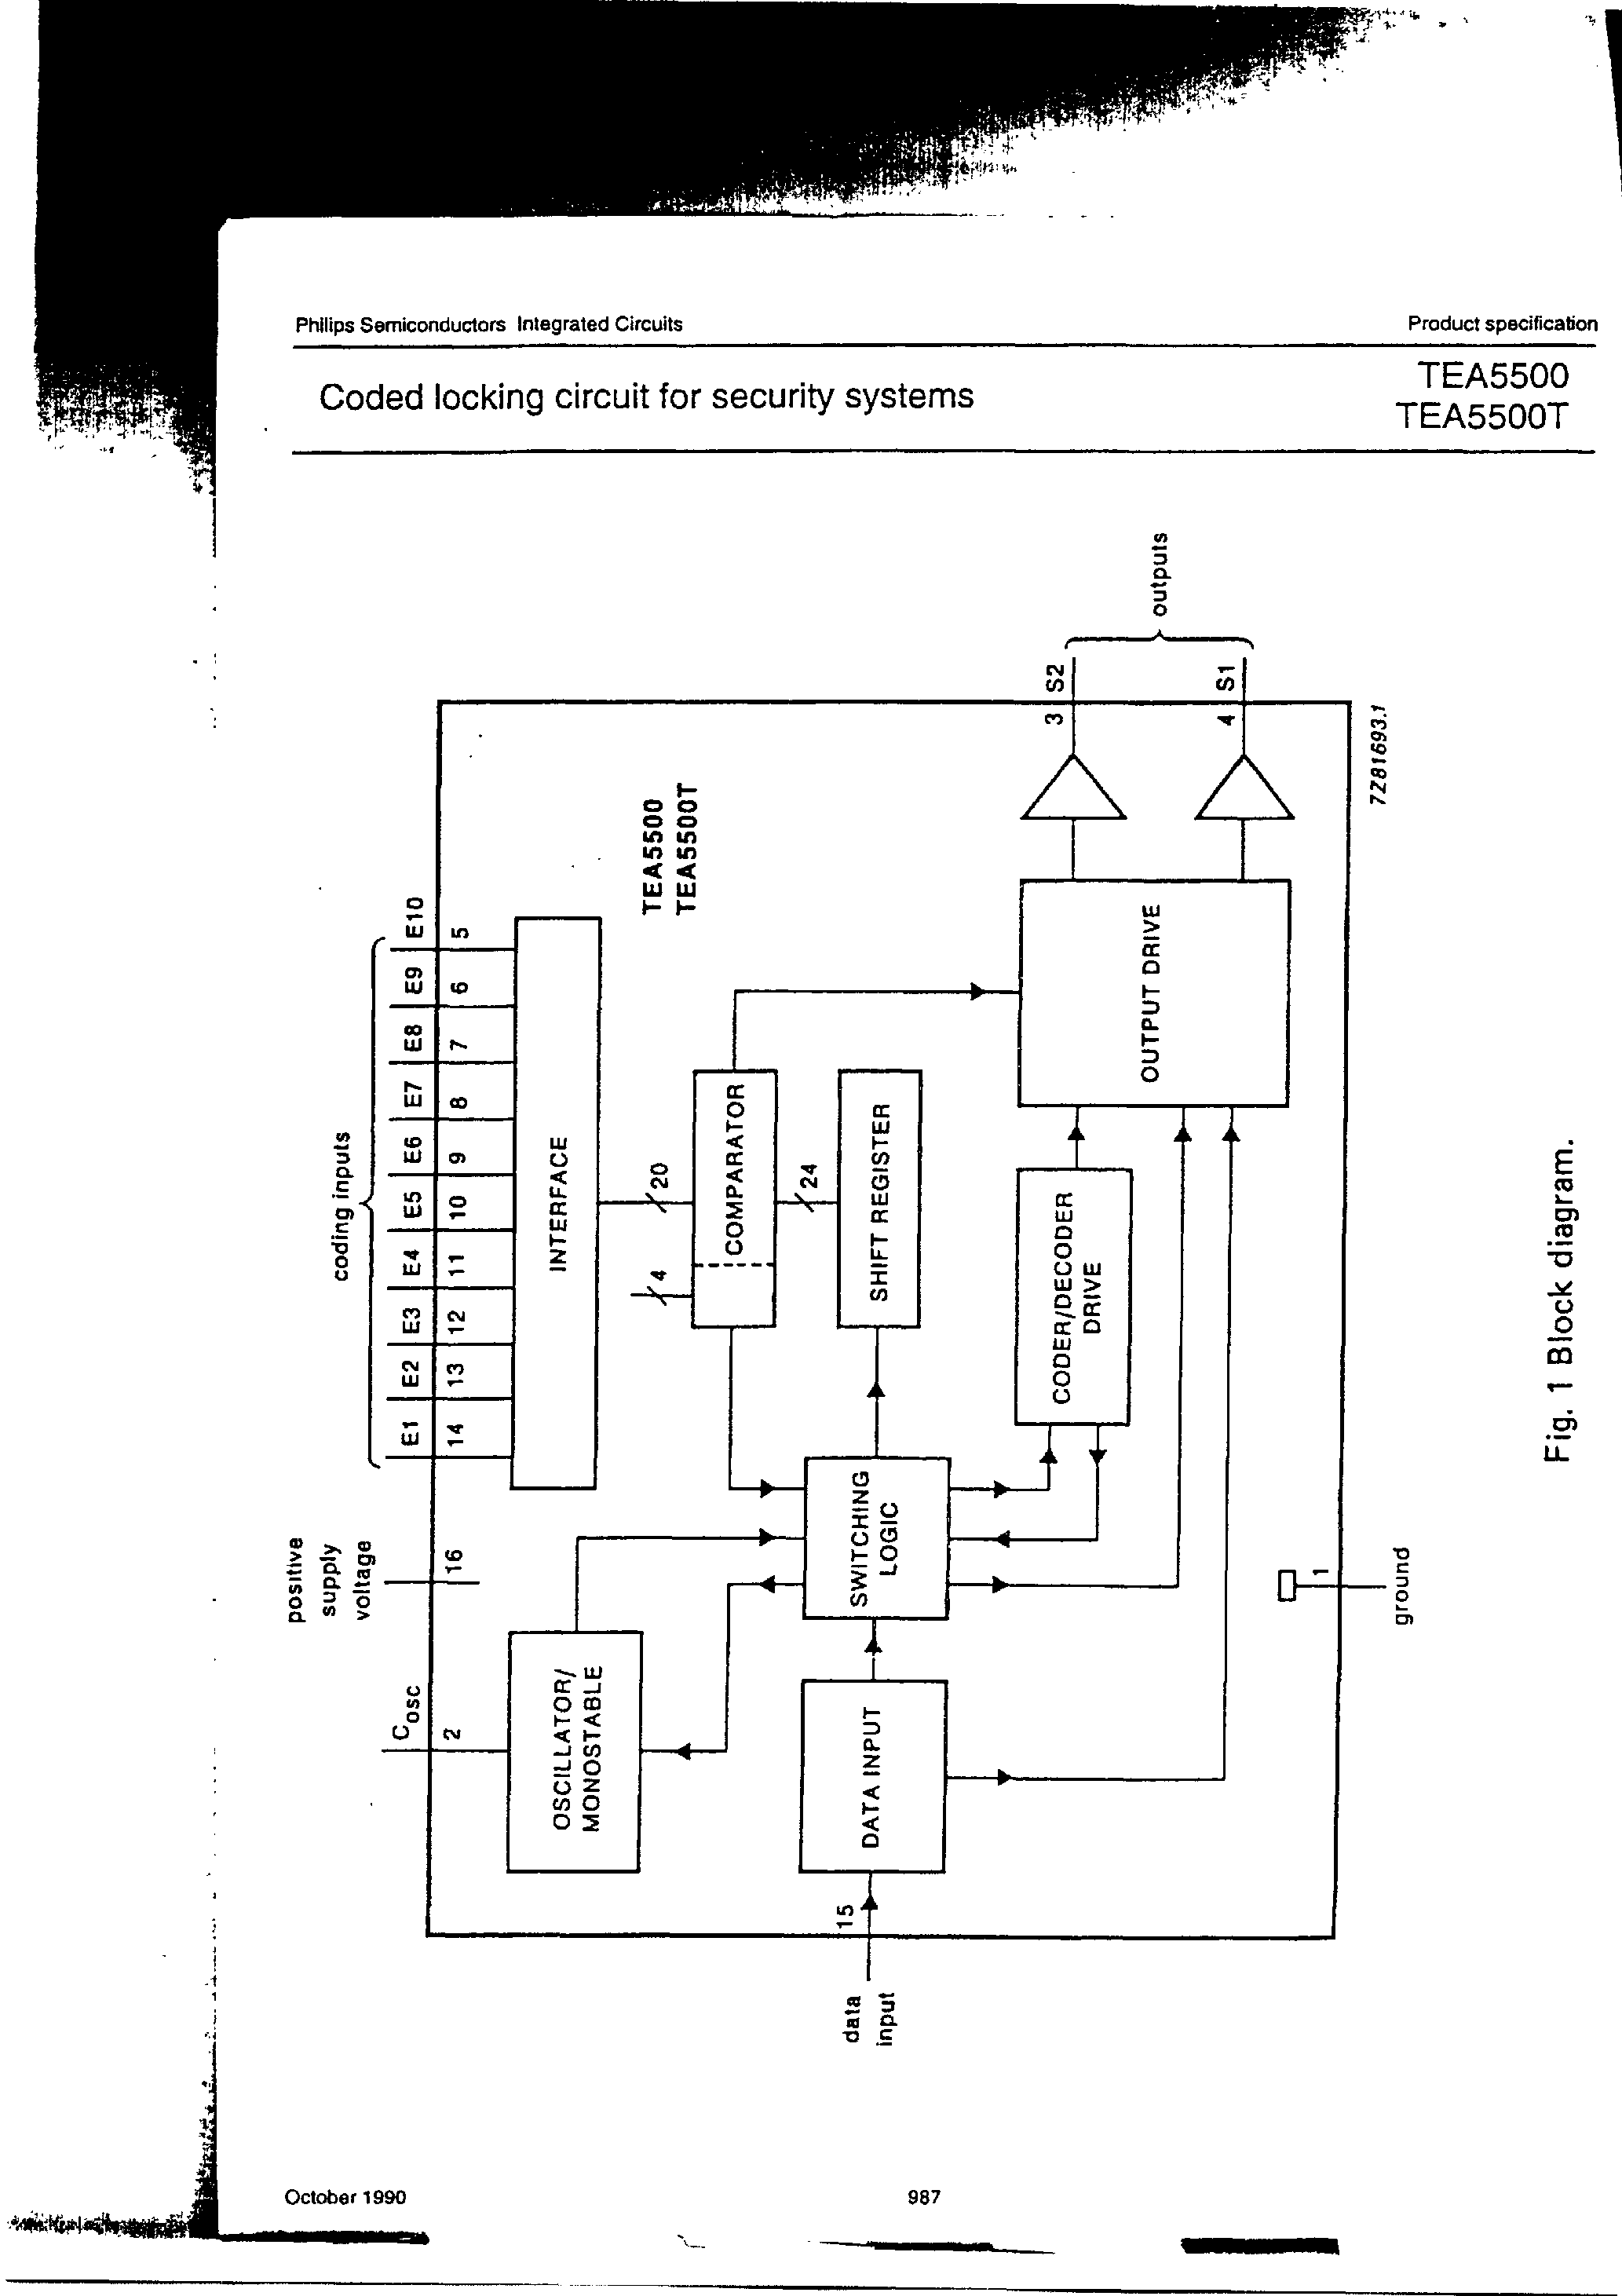 Datasheet TEA5500T - Coded locking circuit for security systems page 2